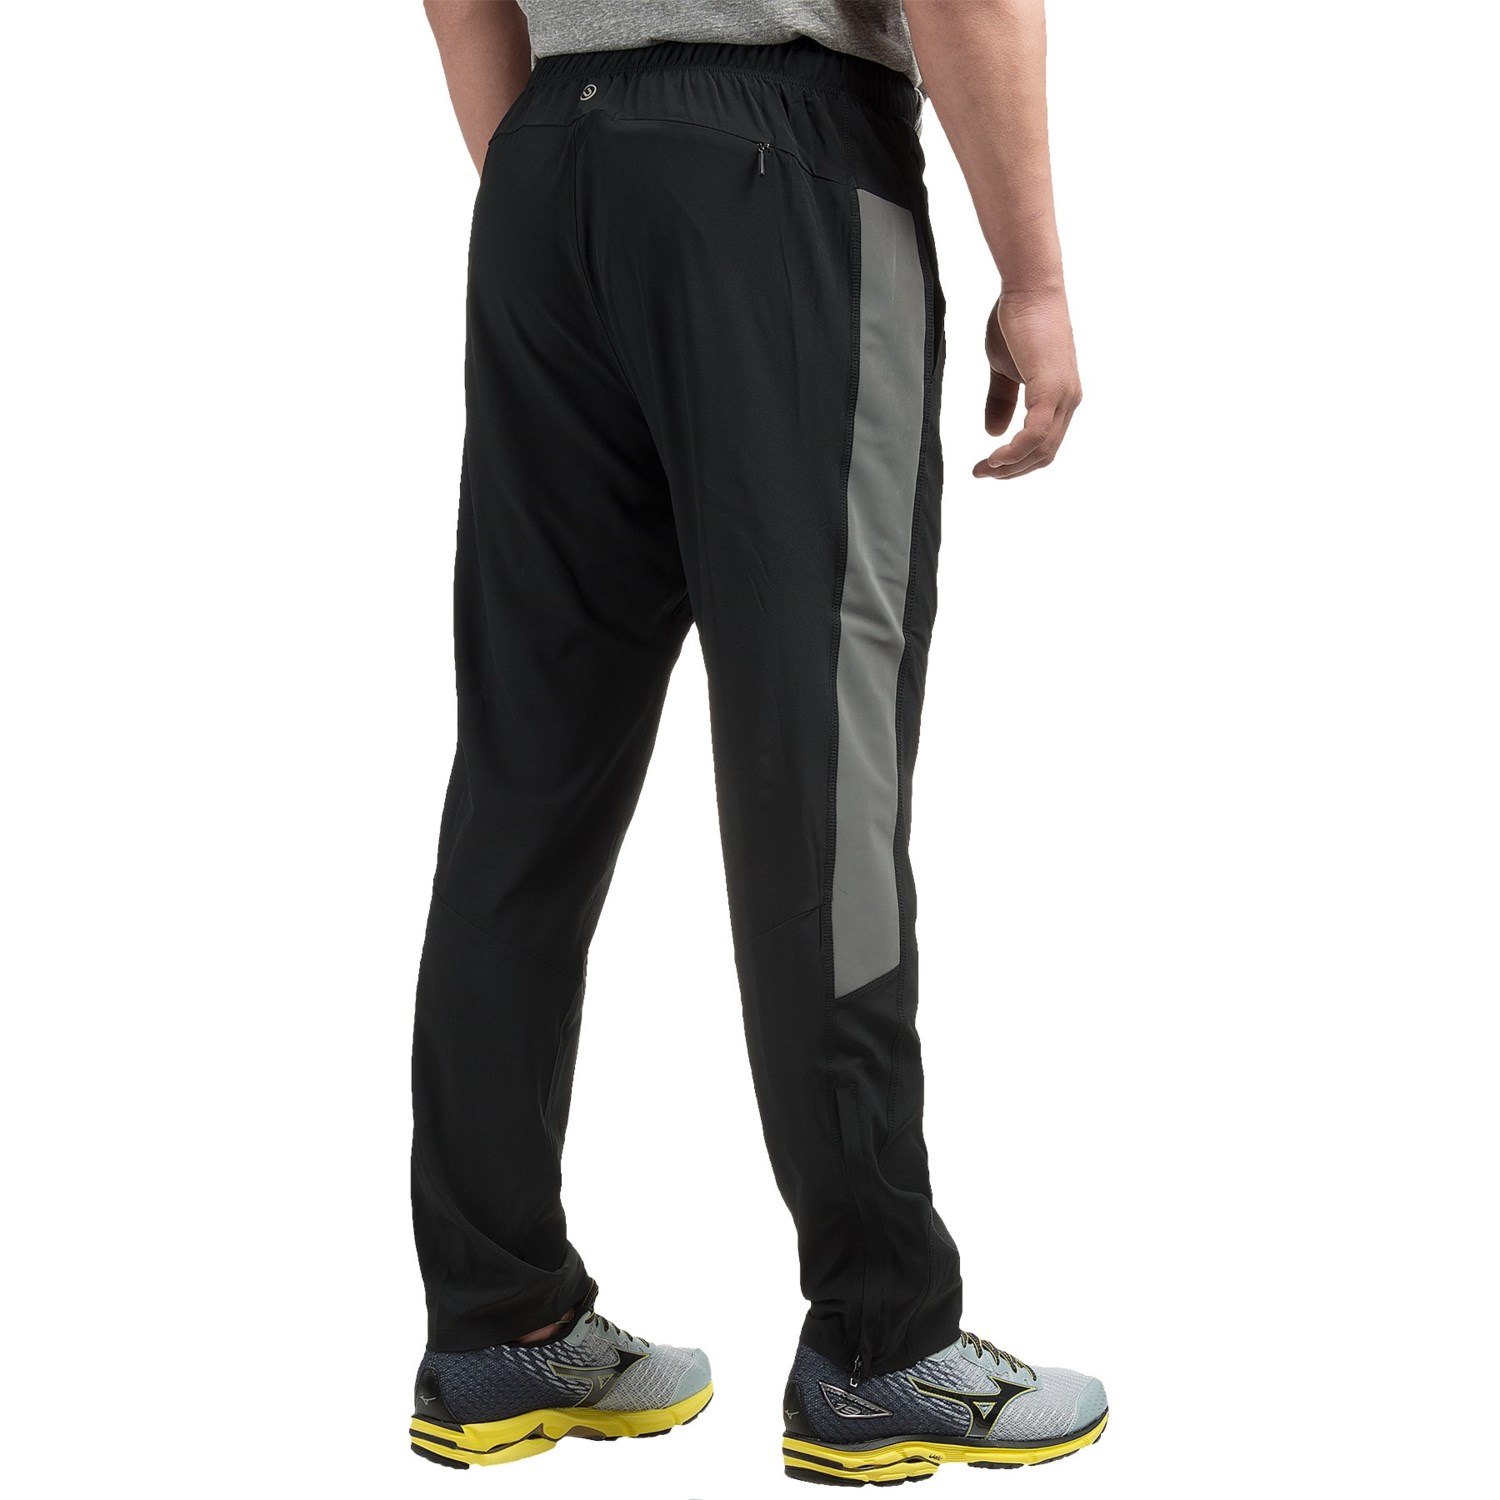 AL1VE Woven Stretch Running Pants (For Men) - Save 50%